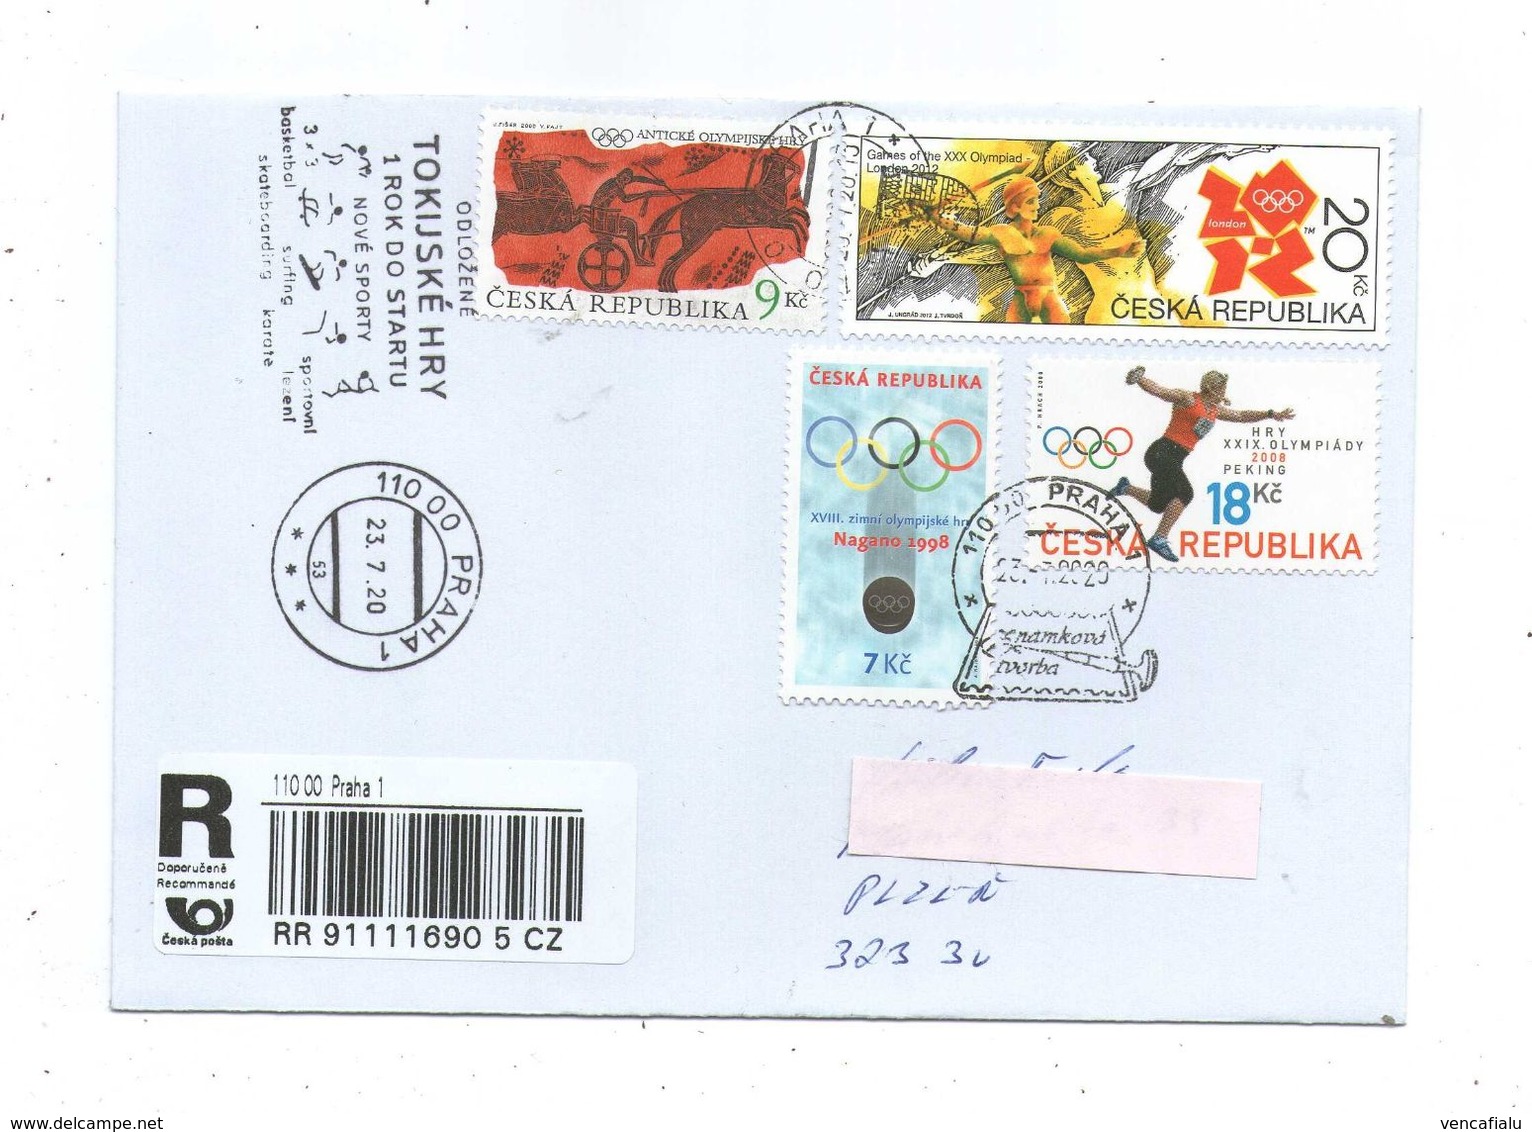 Czech Republic 2020 - Moving The Deadline By One Year, Special Postmark, Postage Registered Used, Nice Stamps - Summer 2020: Tokyo